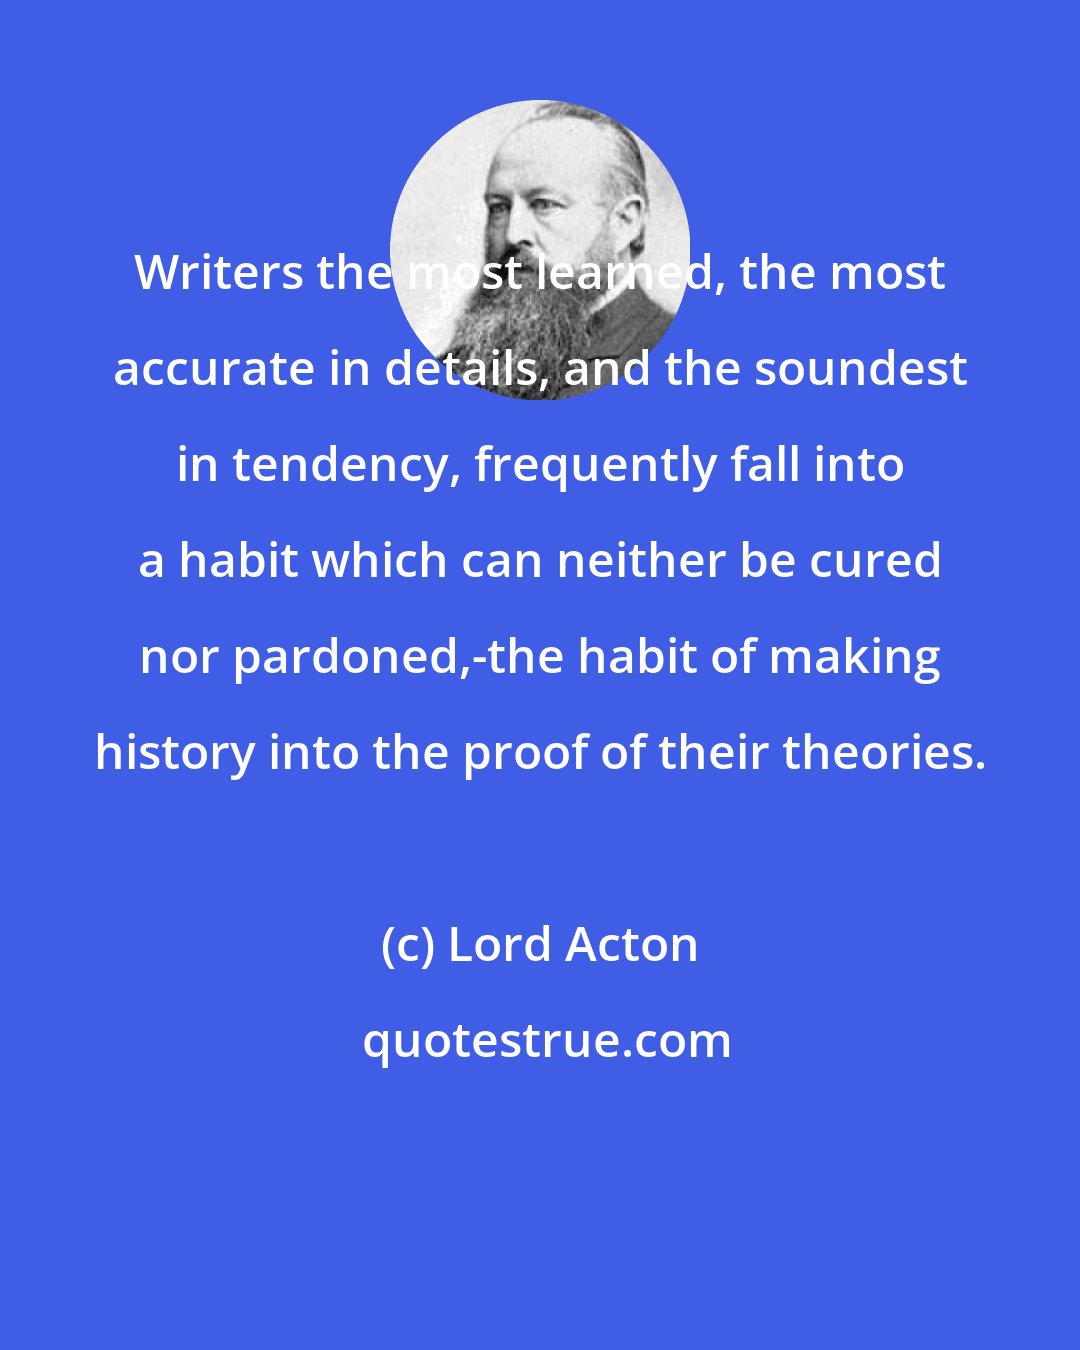 Lord Acton: Writers the most learned, the most accurate in details, and the soundest in tendency, frequently fall into a habit which can neither be cured nor pardoned,-the habit of making history into the proof of their theories.